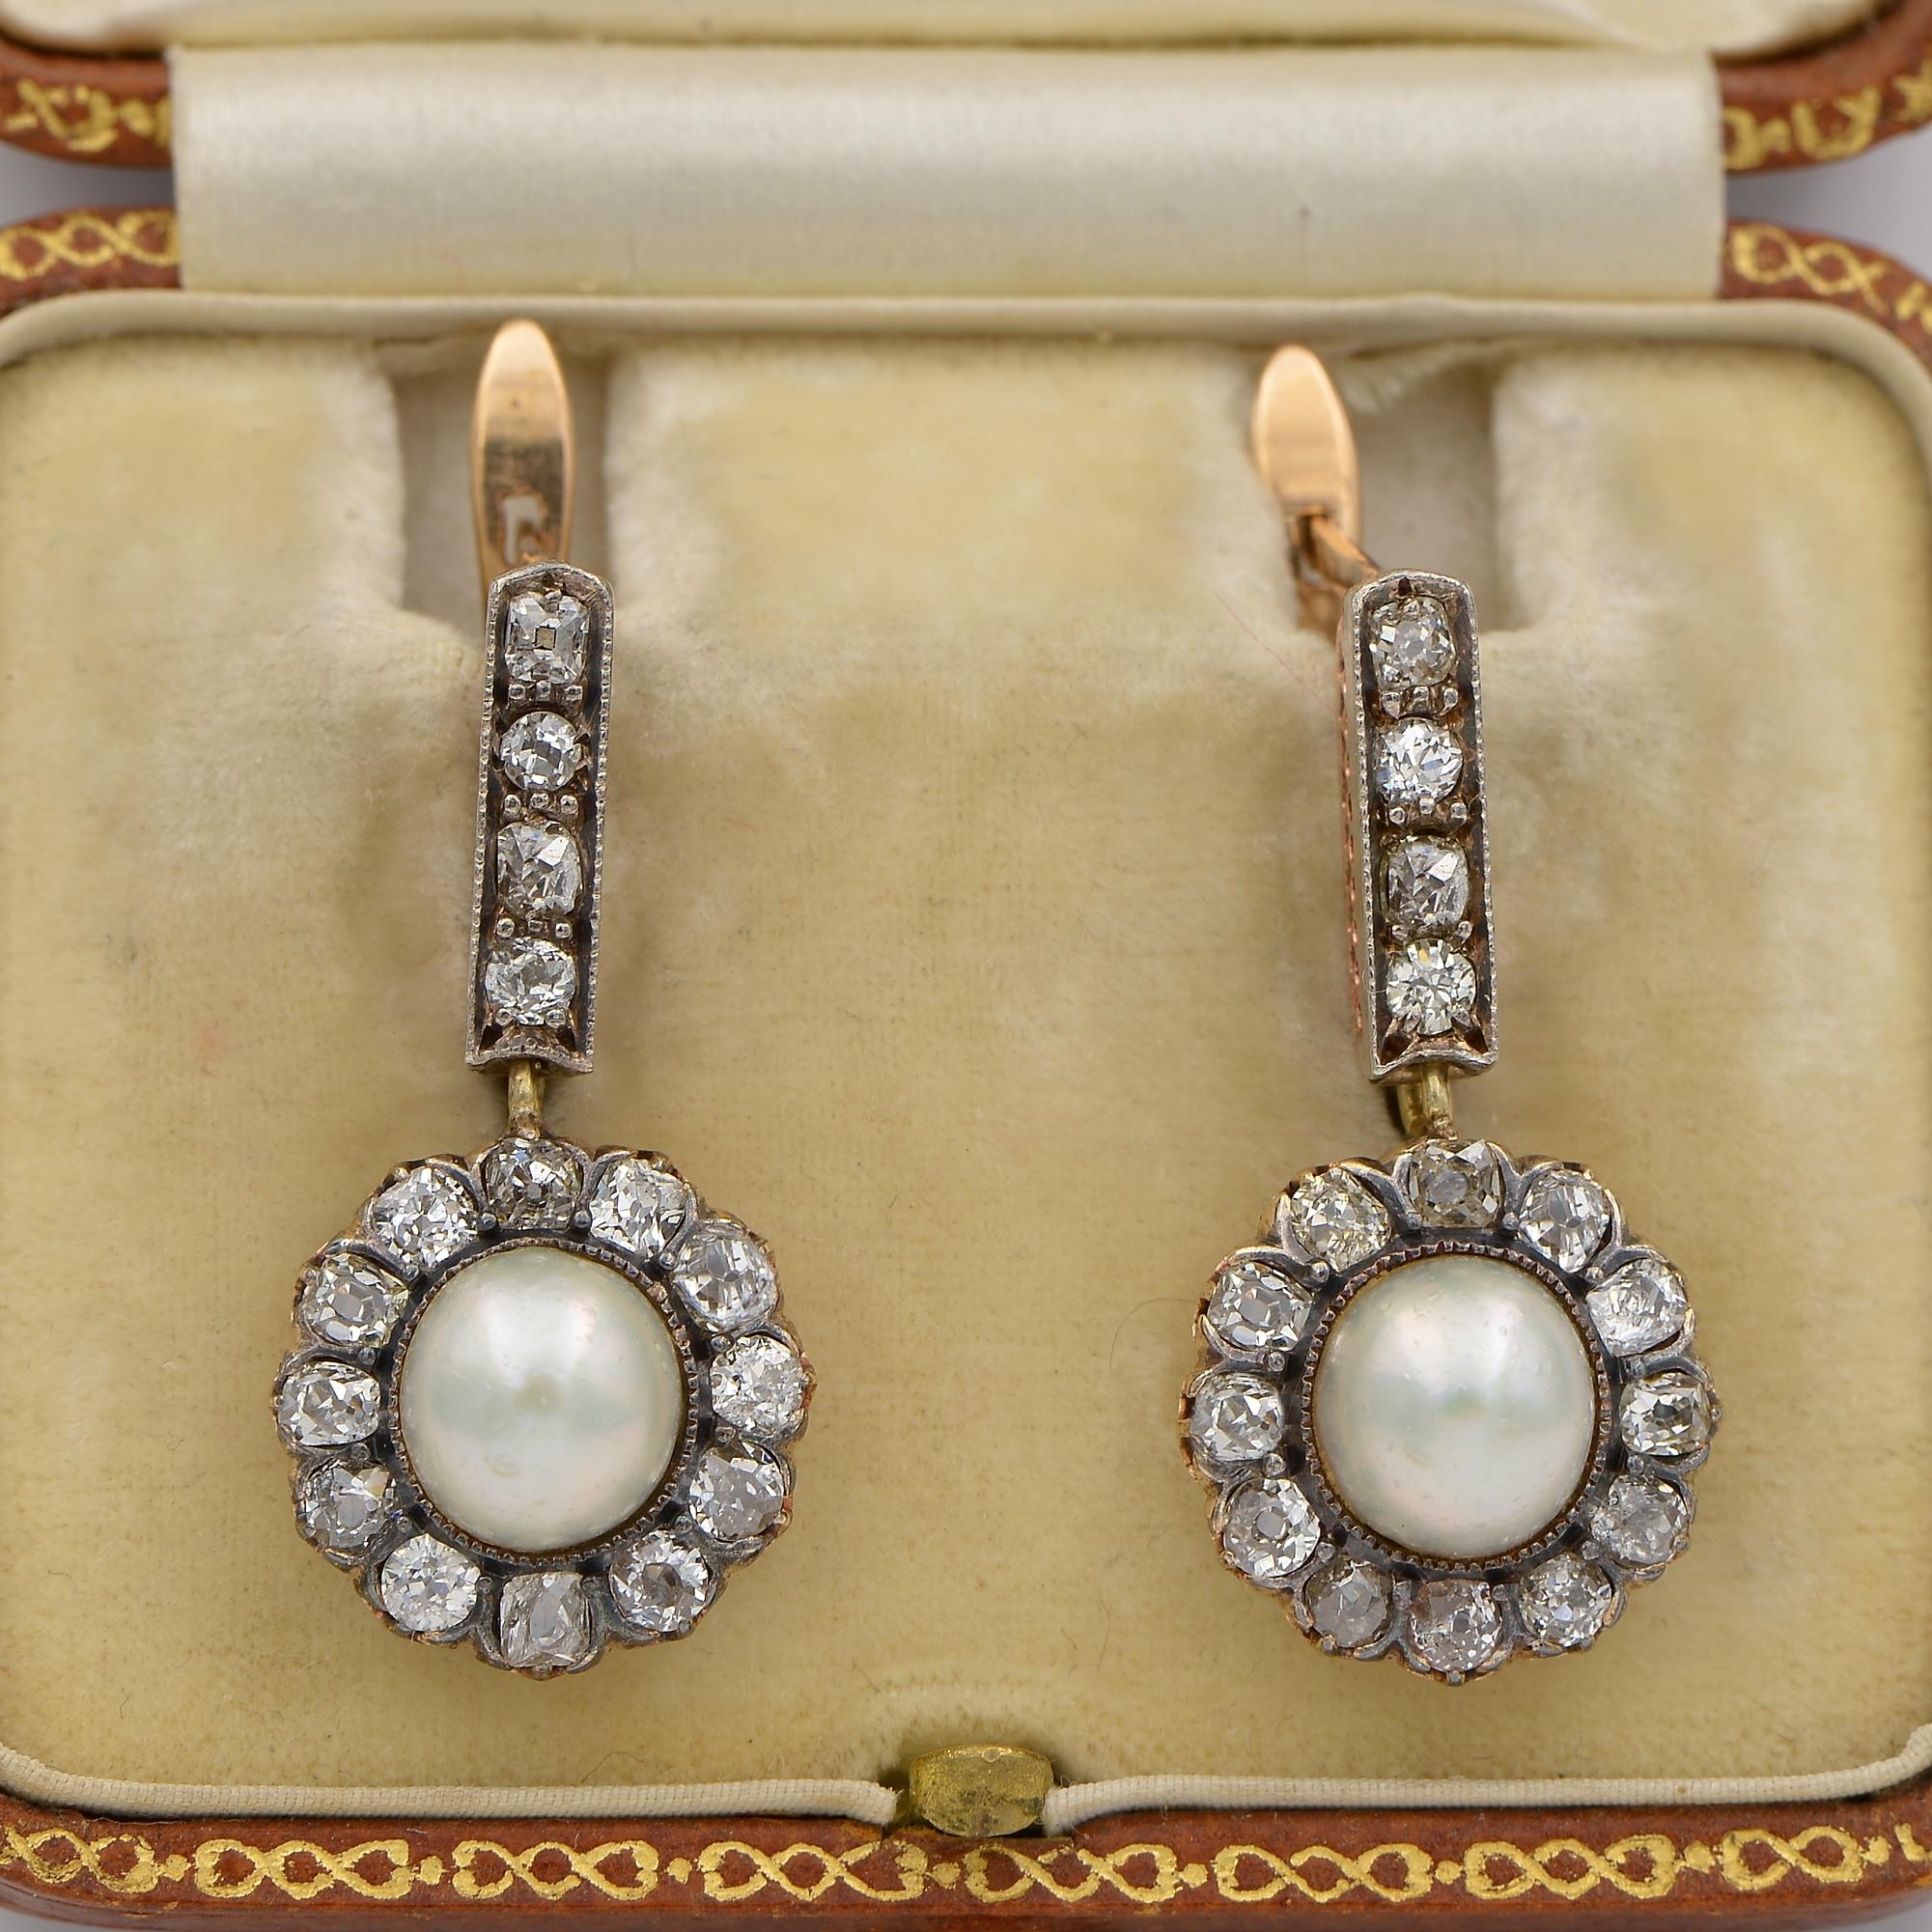 Queen of Seas
1st place in Victorian tradition are Natural Pearl and Diamond earrings
Rare, magical beauty of natural pearls have been treasured for millennia by mankind
These beautiful pair of Victorian era ear drops are 1880 ca
They are designed